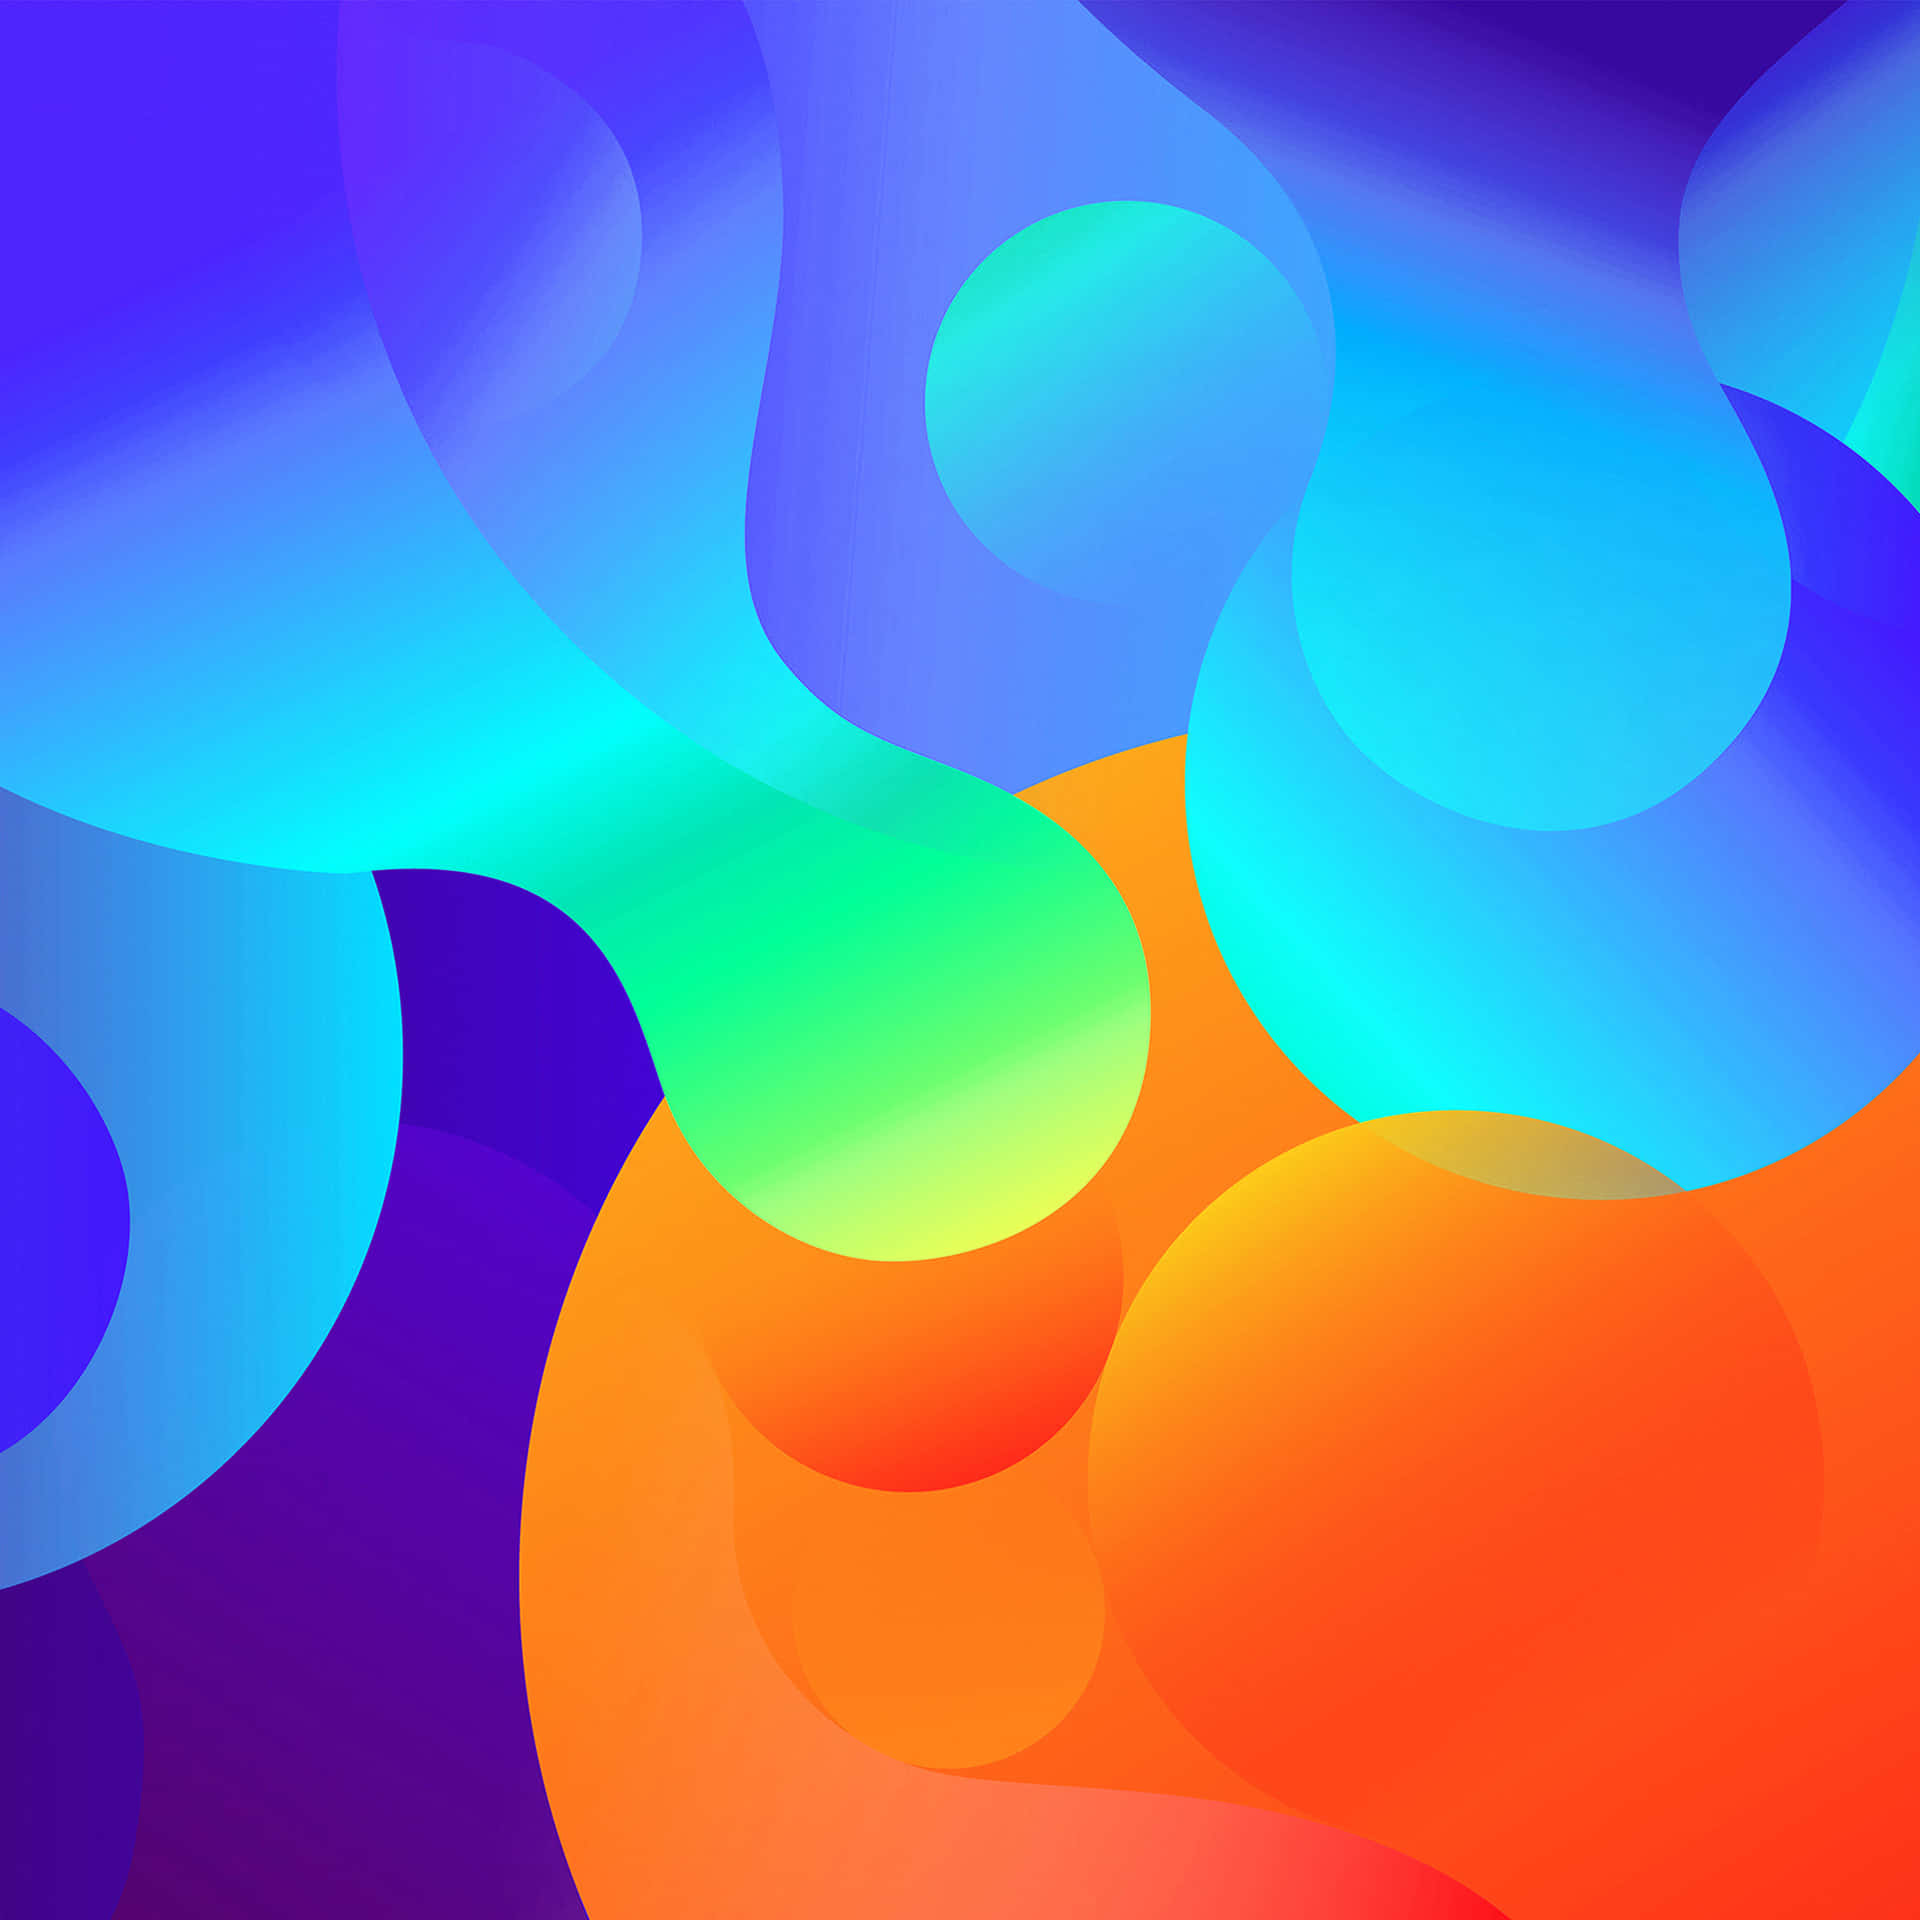 Abstract Abstract Background With Colorful Shapes